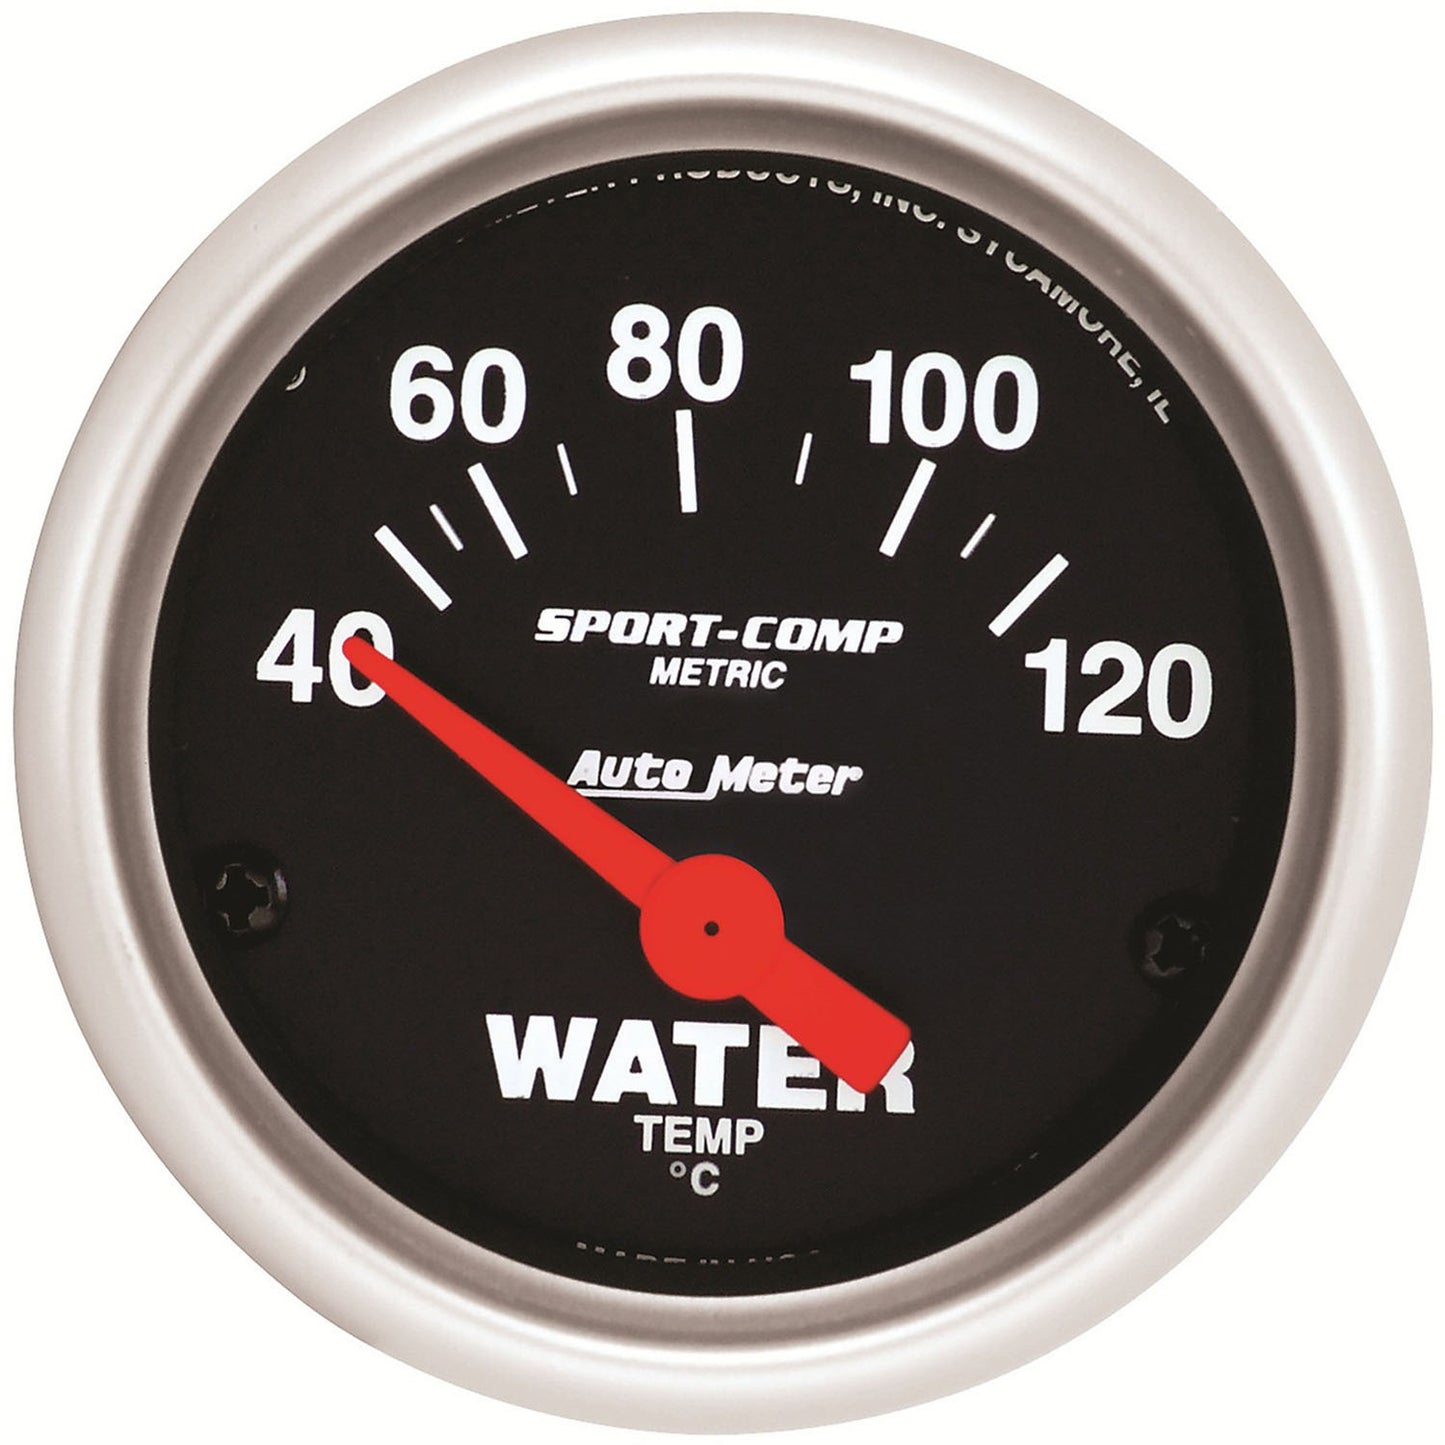 AMT-3337M Autometer Gauge, Sport-Comp, Water Temperature, 2 1/16 in., 40-120 Degrees C, Electrical, Each